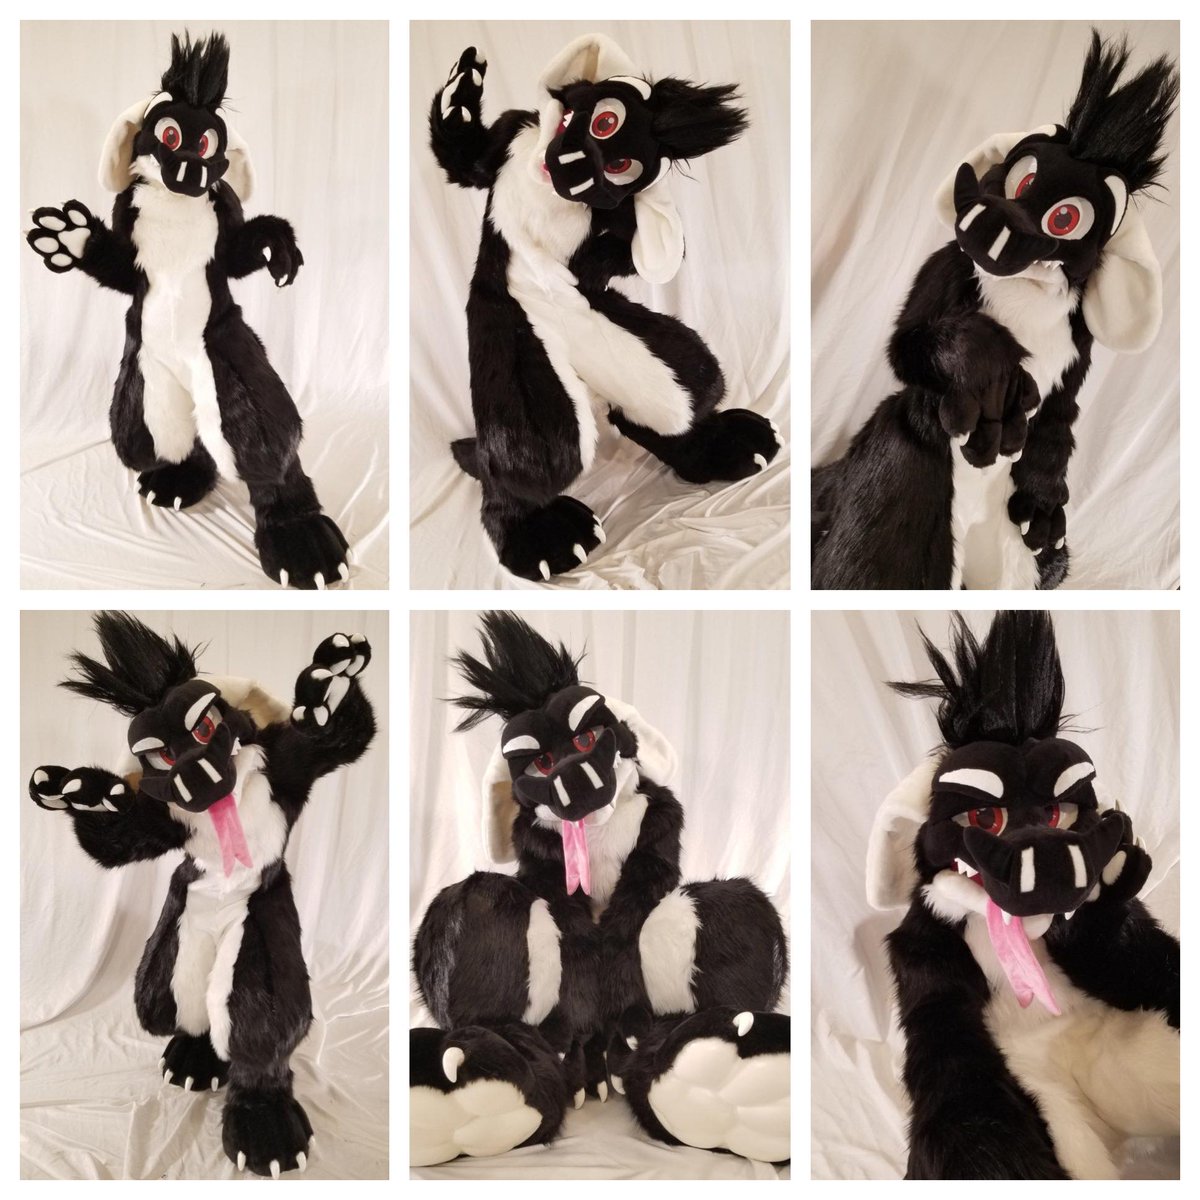 So I like to mention today on March 10th. It has been a year now that my suit was finished. This is a special day for me because i was so happy to see how he turned out. Wanna thank my maker @MoreFurLess For giving him a new look and am always happy with how it came out. 😊